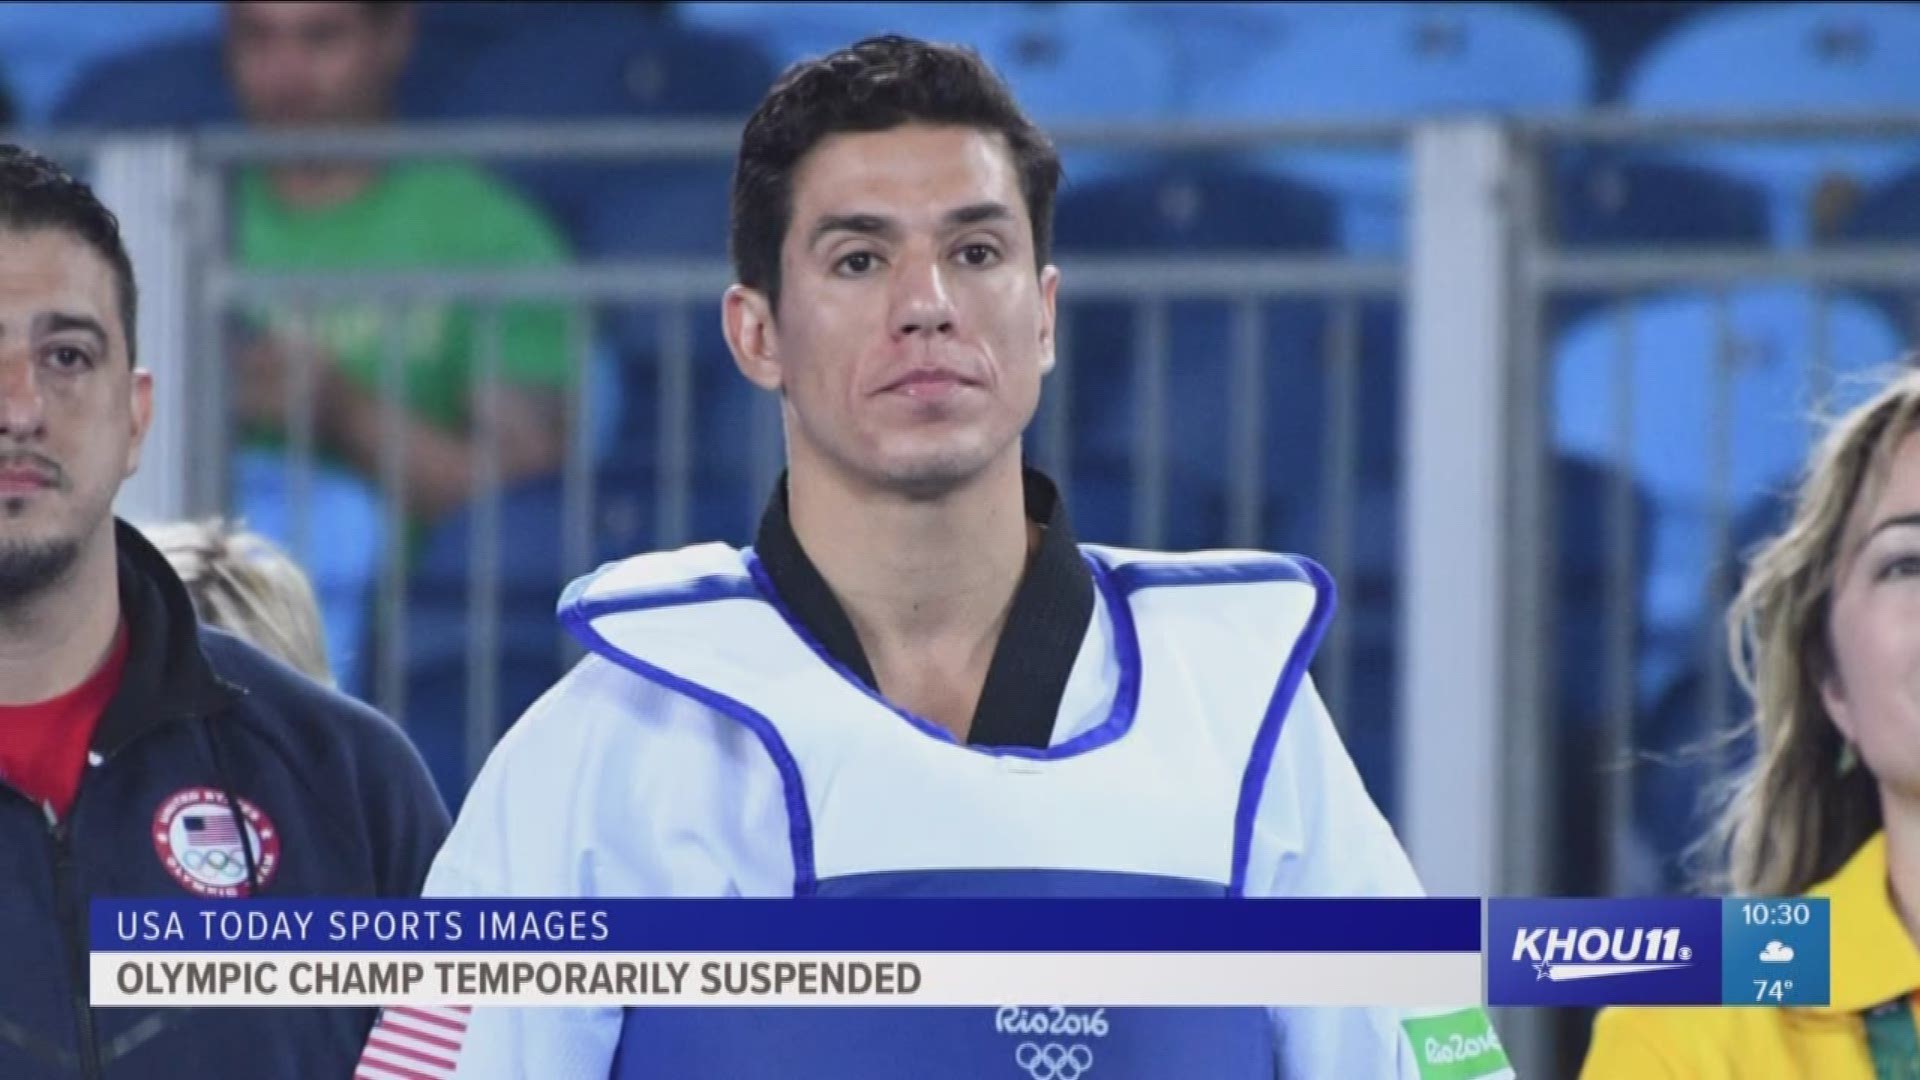 Two-time Olympic taekwondo champion Steven Lopez has been temporarily suspended after four women filed a lawsuit in federal court accusing USA Taekwondo and the U.S. Olympic Committee of sex trafficking.